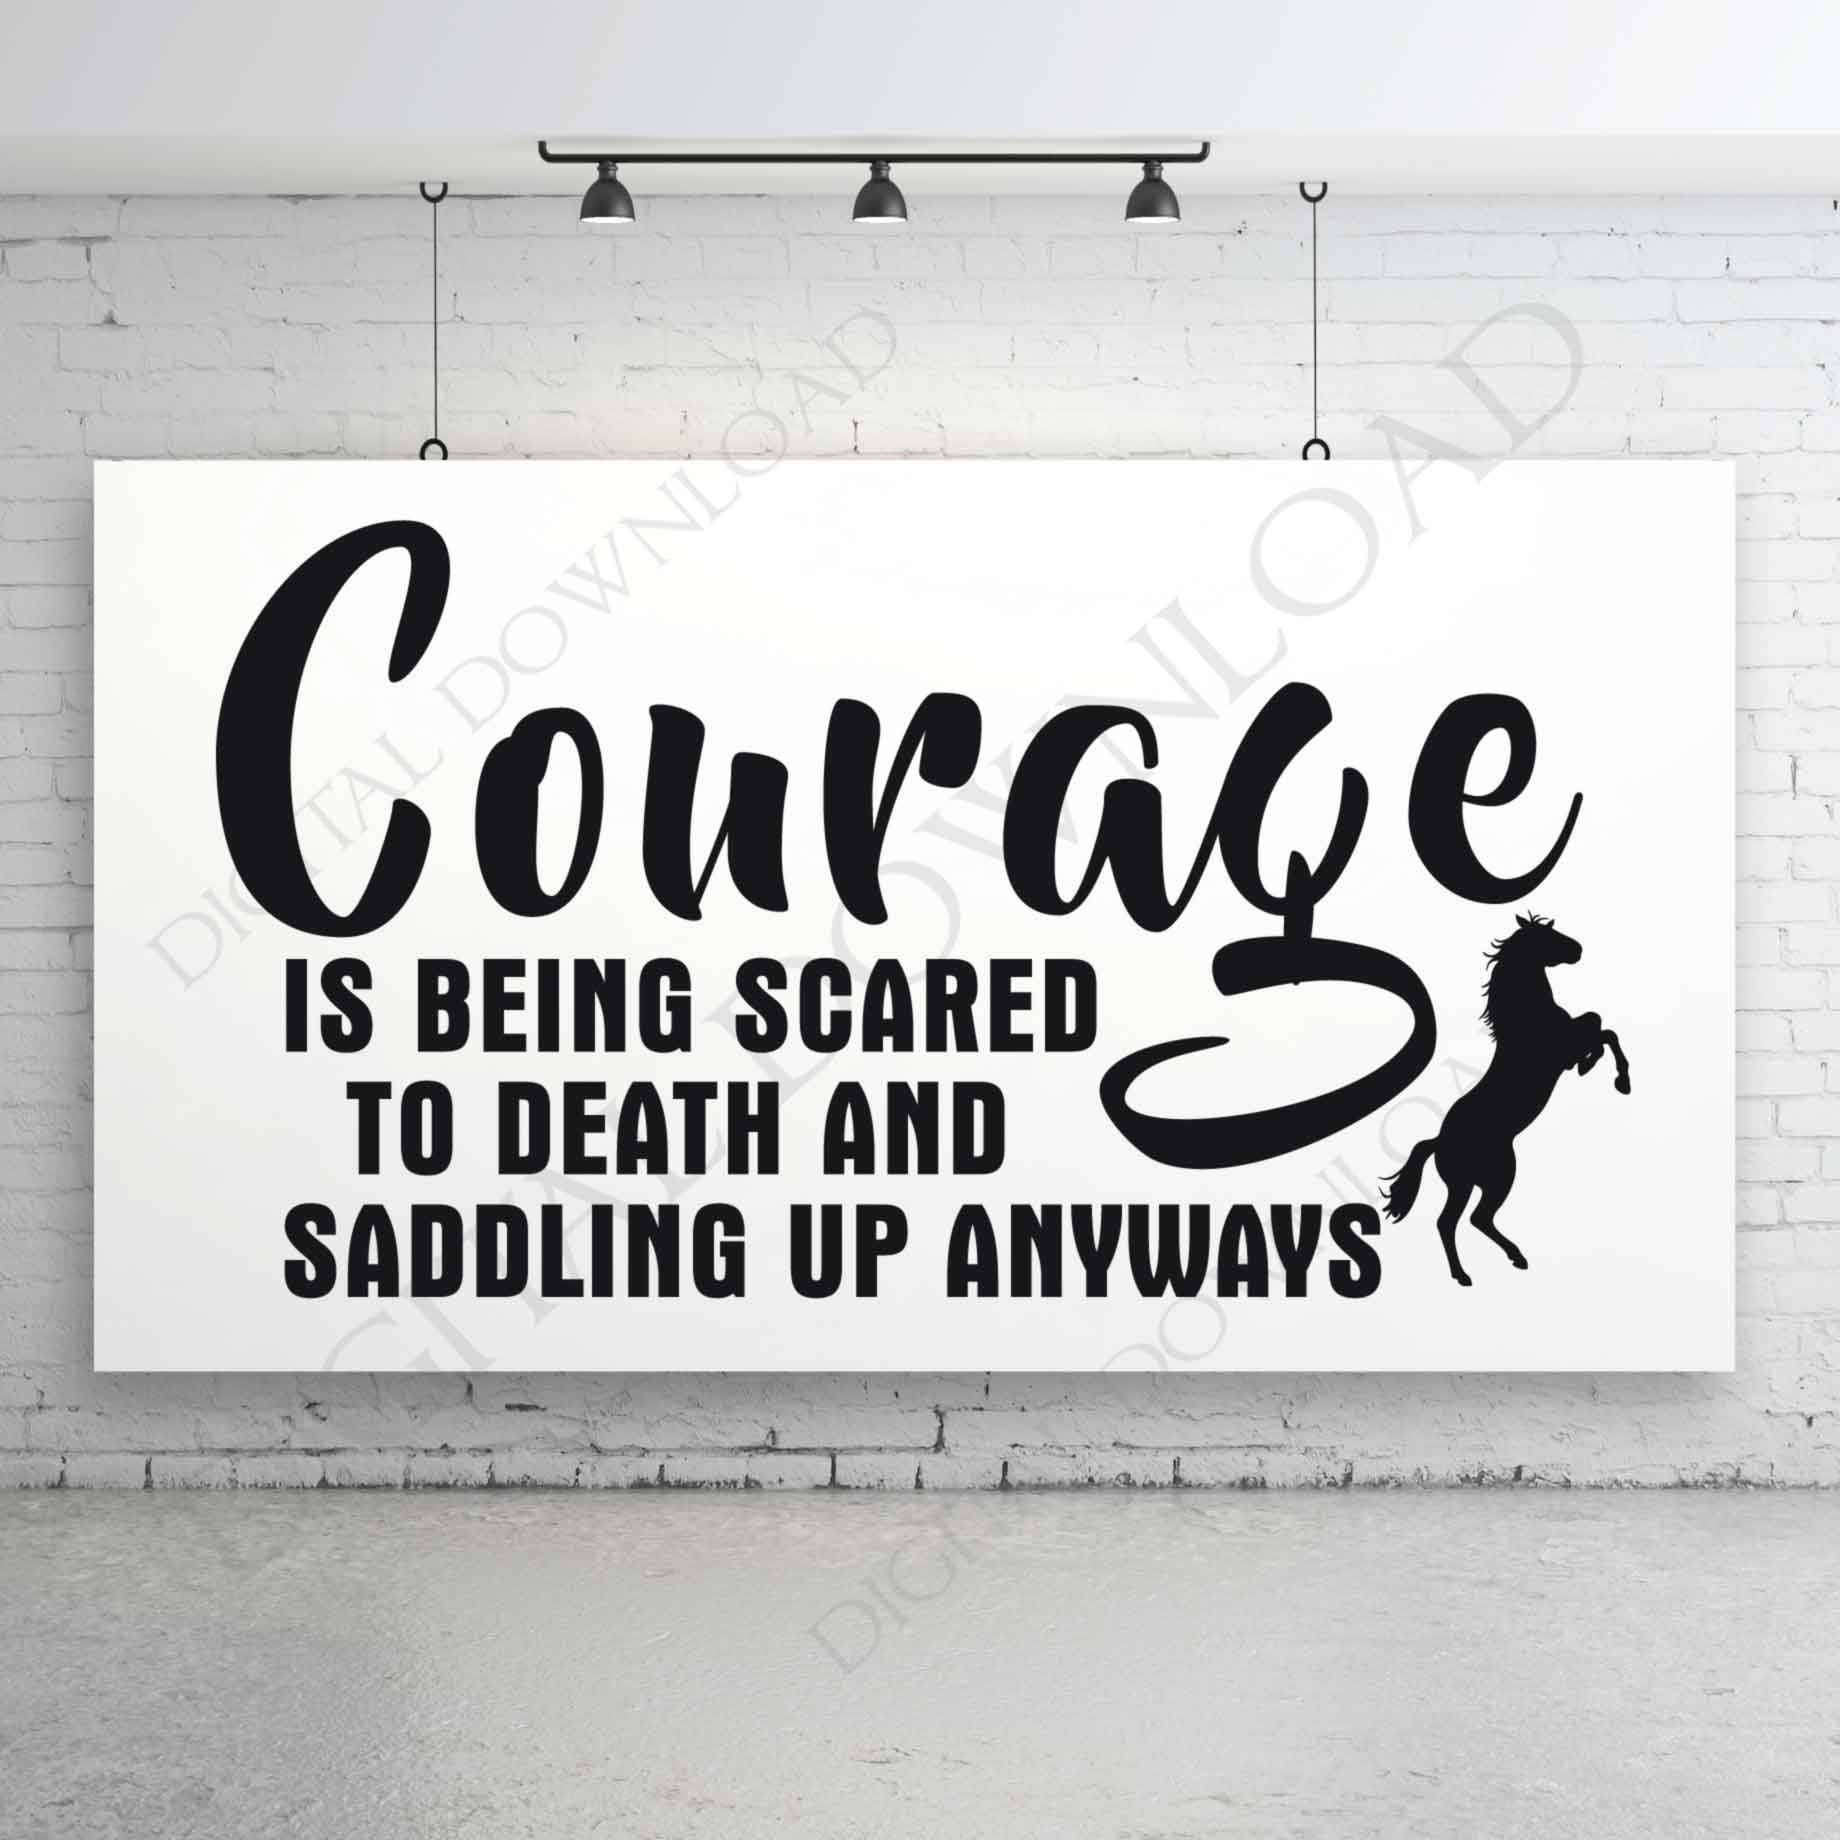 Download Courage saddling up anyways Horse Quote Vector Download | Etsy